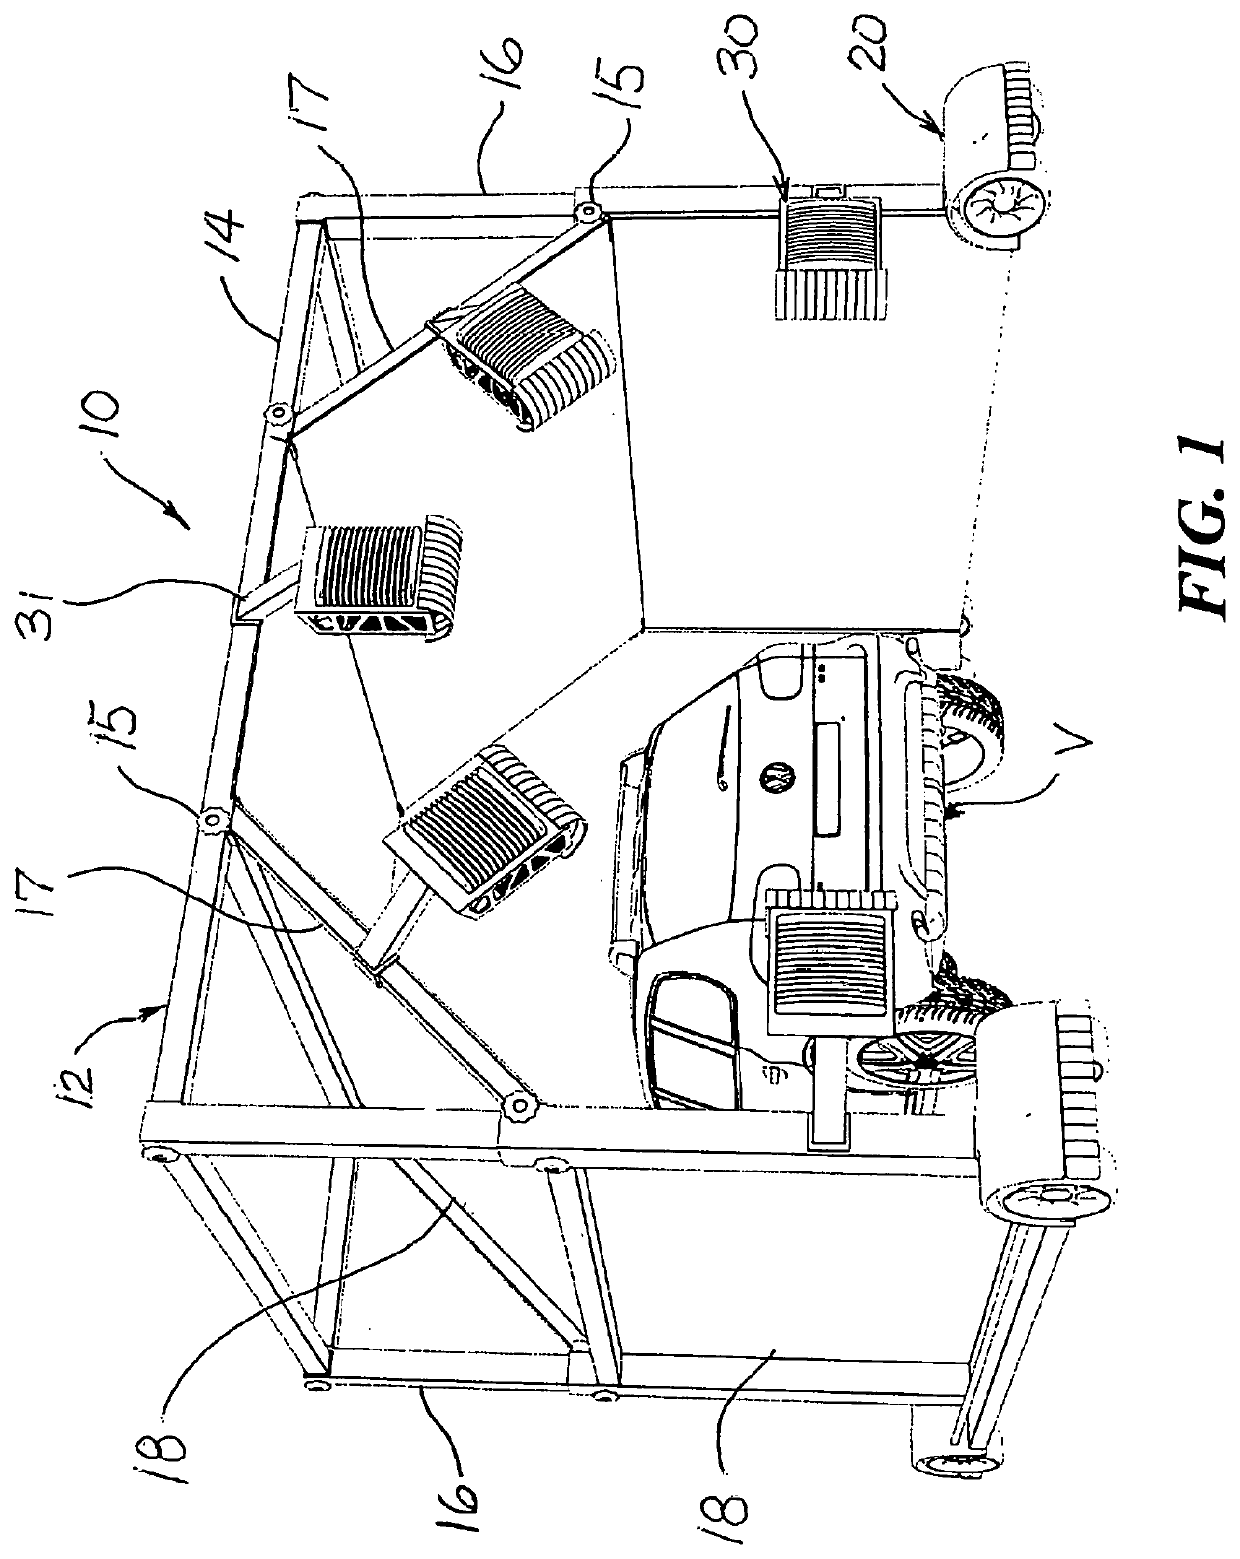 Vehicle surface scanning system